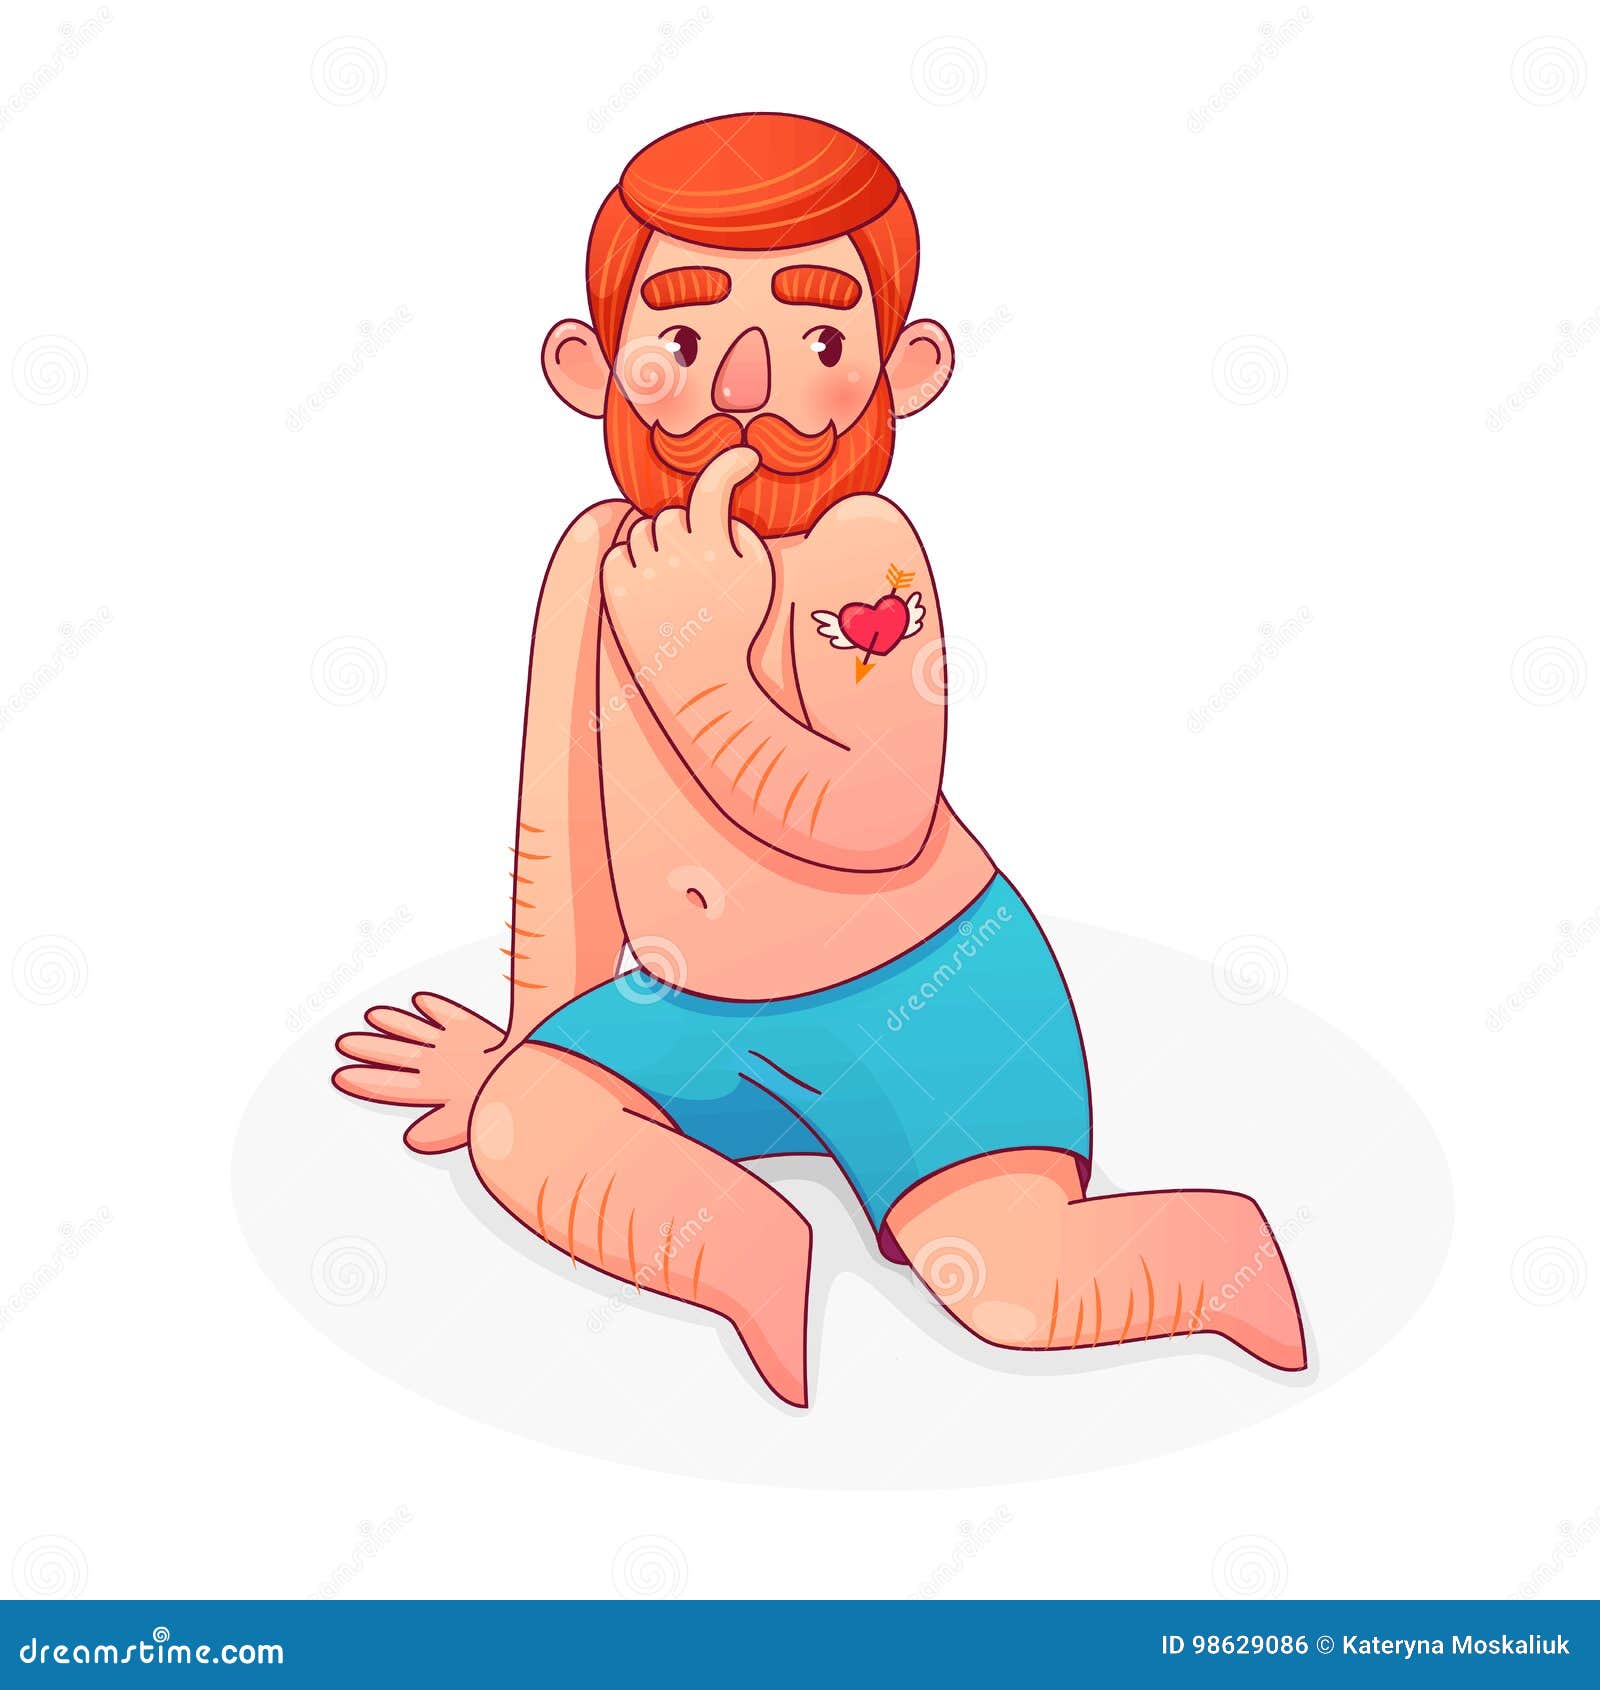 Ginger Shirtless Man in Boxers. Pin-up Male with Vintage Tattoo Stock Vector - Illustration of body, beautiful: 98629086